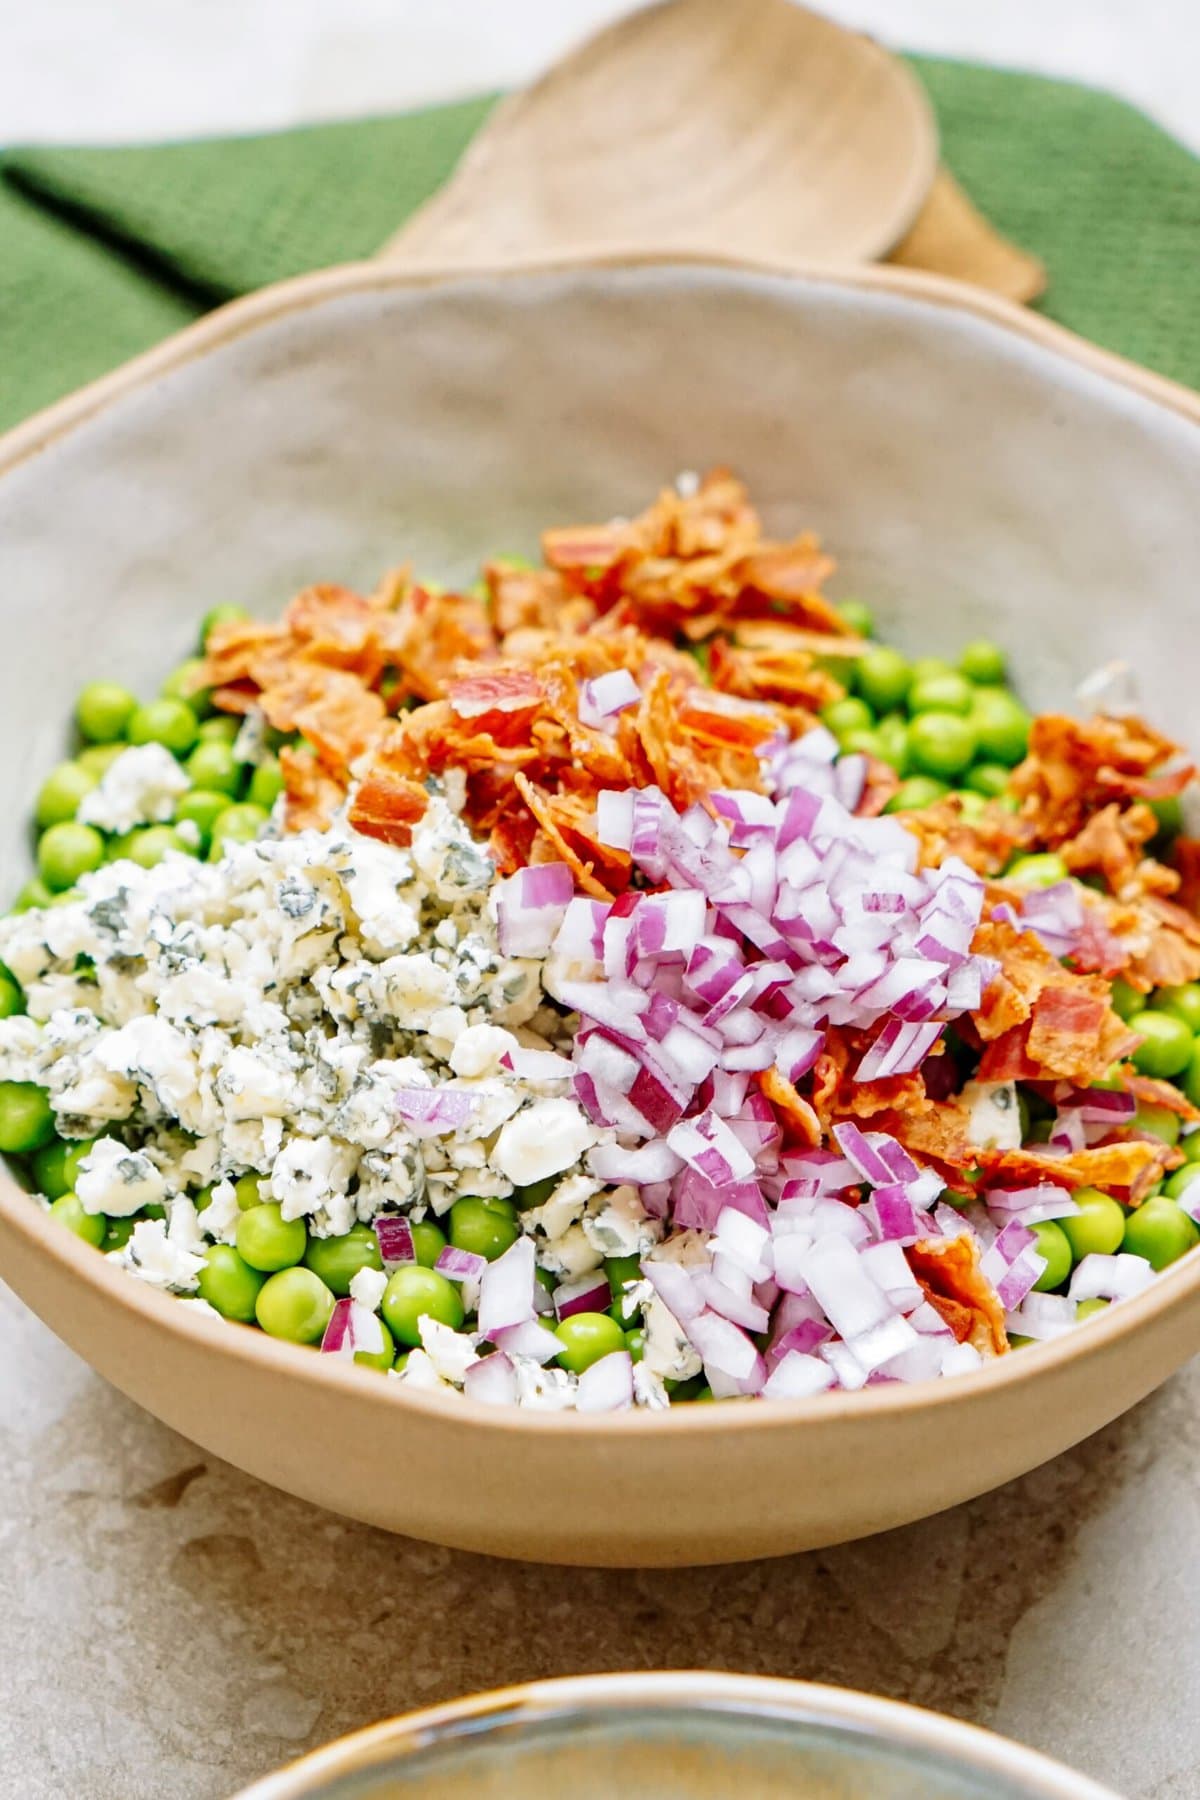 A bowl of pea salad containing peas, chopped red onions, crumbled cheese, and bacon bits.